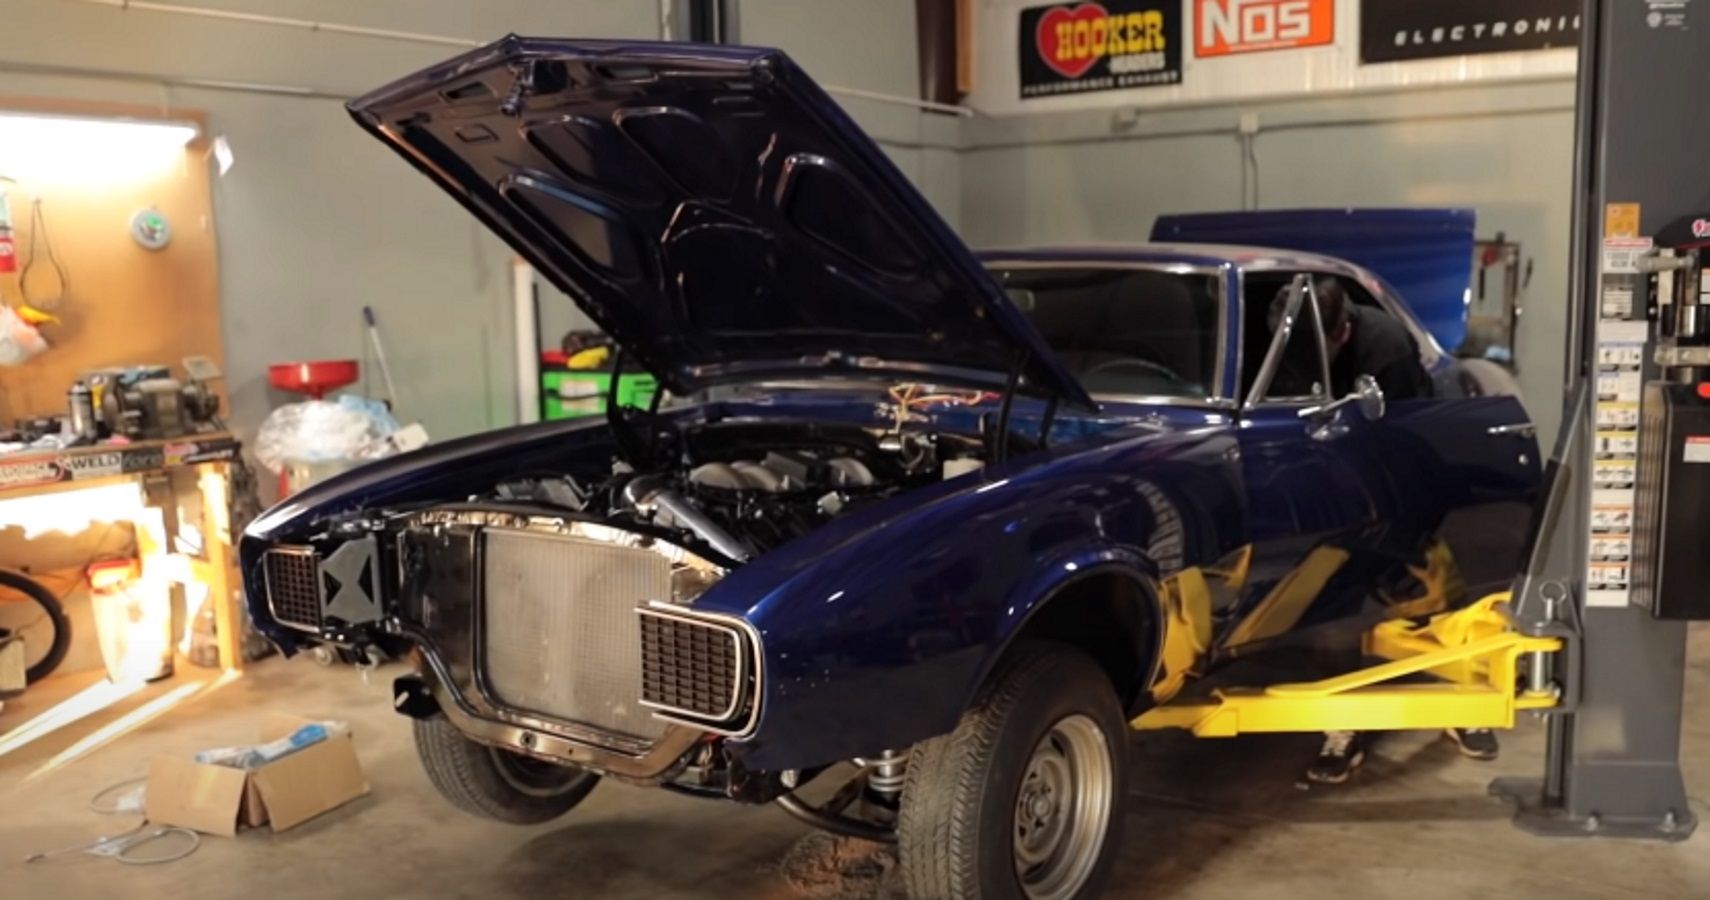 YouTuber Puts A Mustang Coyote Engine In A 1967 Camaro. What Can Go Wrong?